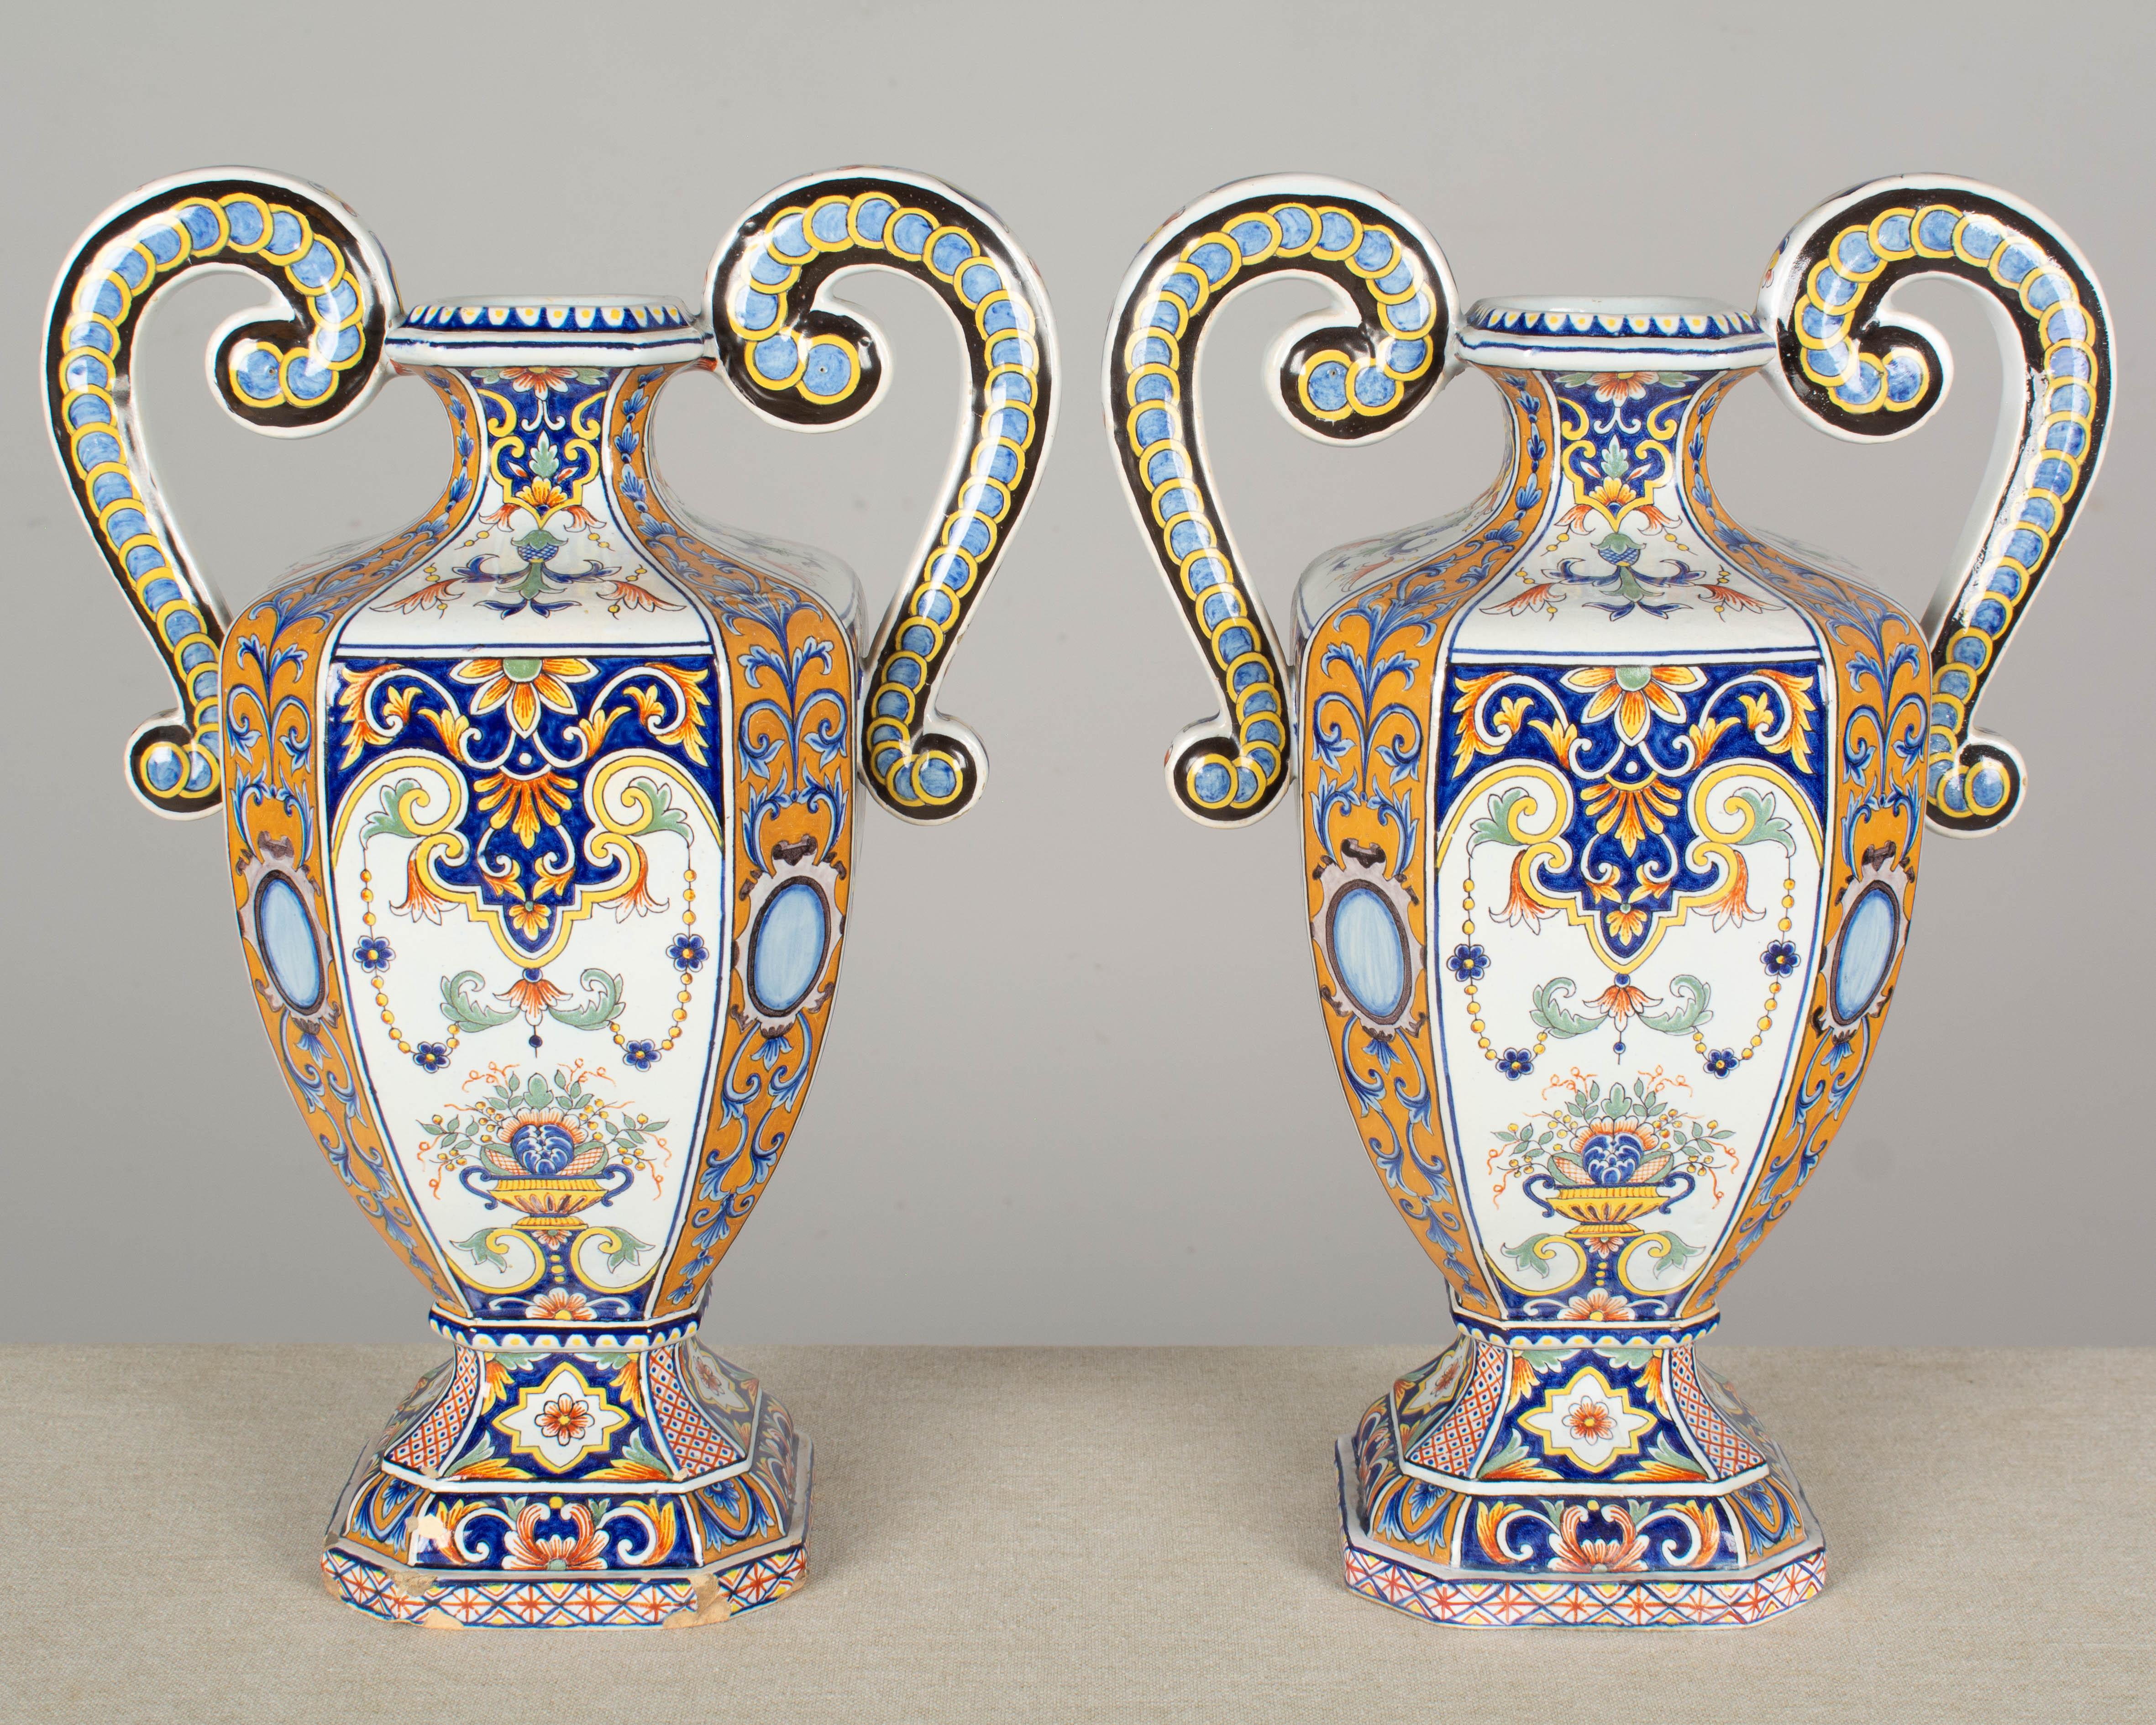 Hand-Painted 19th Century French Desvres Faience Urn Form Vases, a Pair For Sale